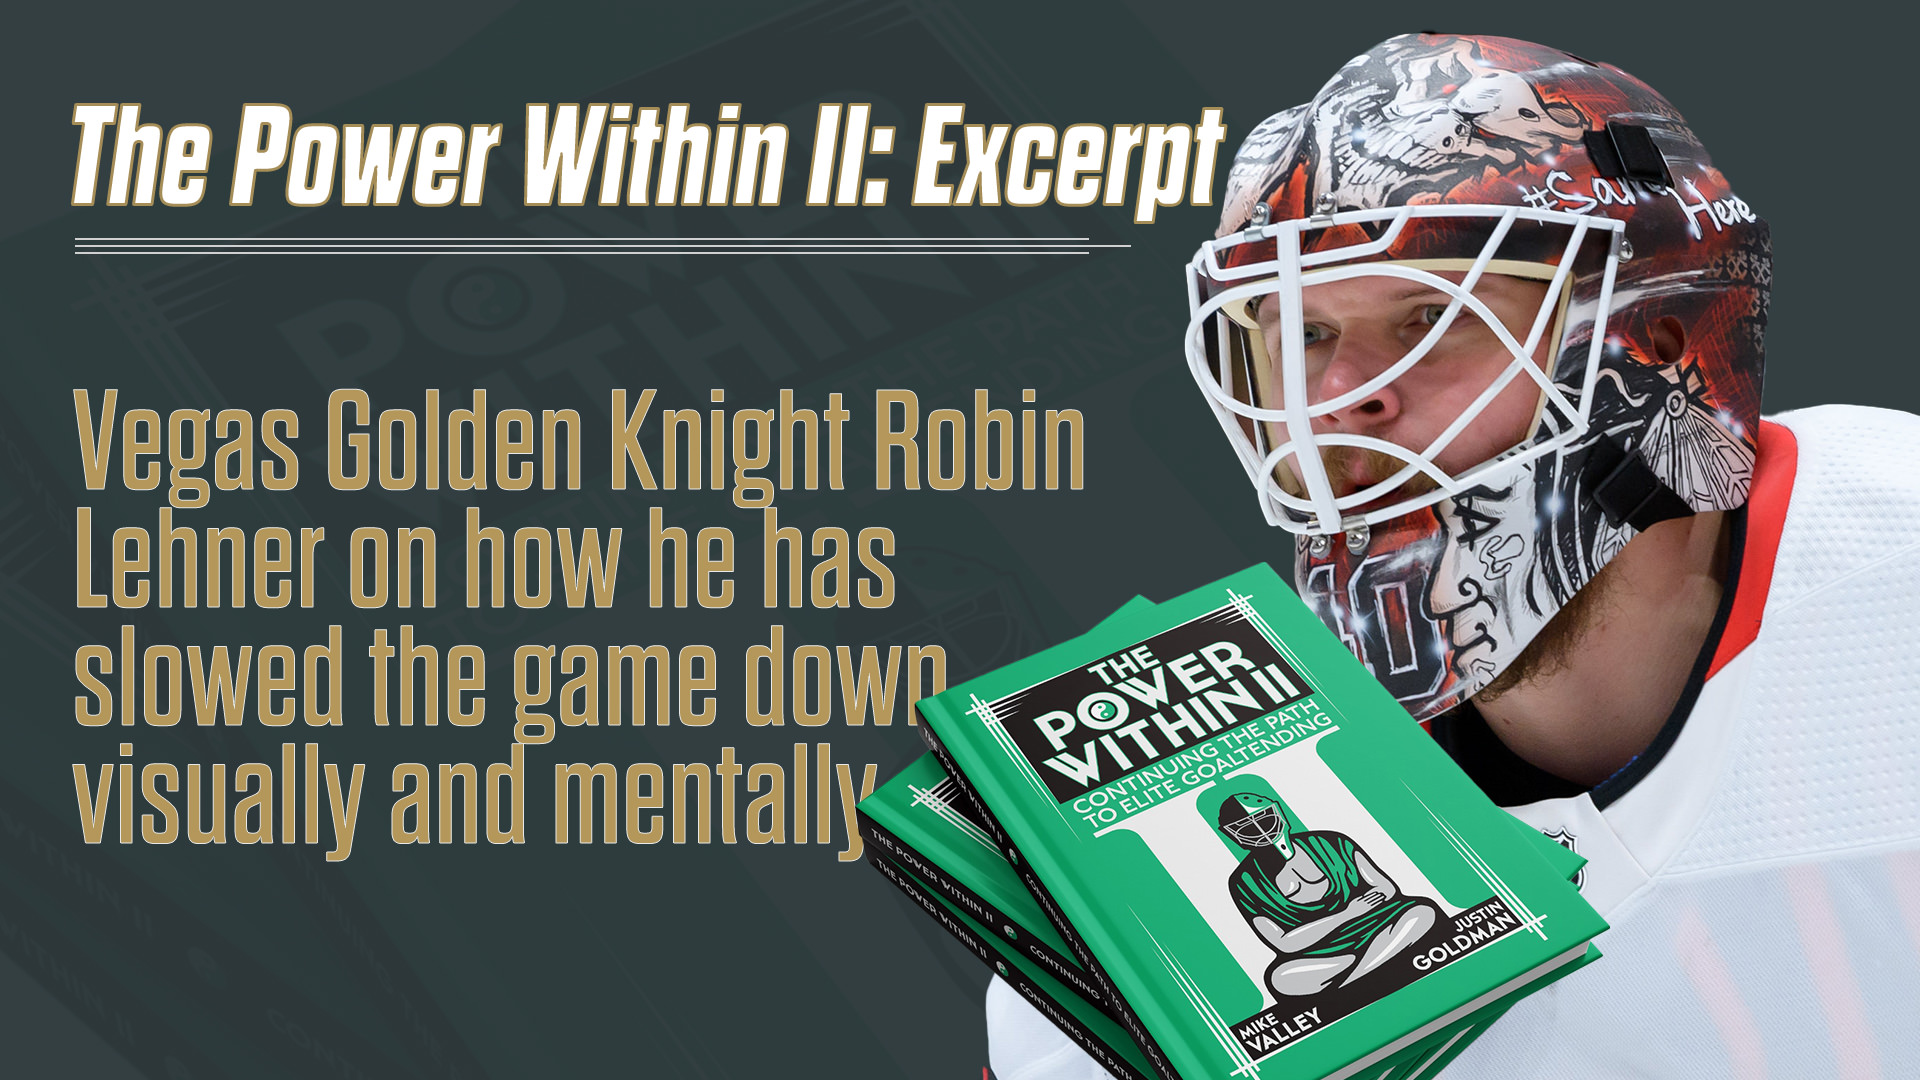 The Power Within II: Excerpt with Robin Lehner